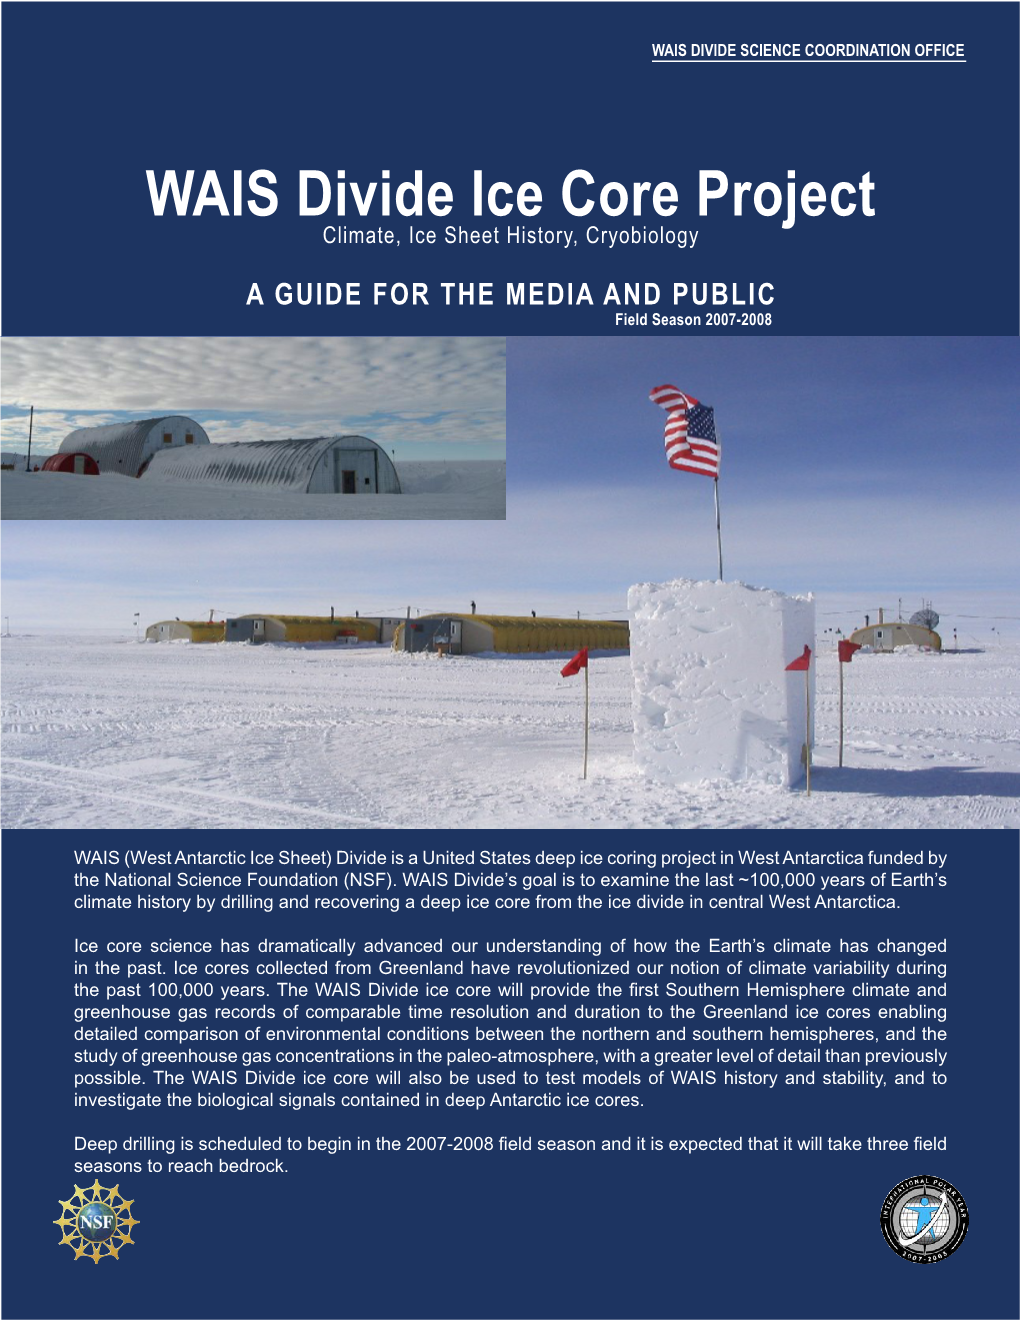 WAIS Divide Ice Core Project Climate, Ice Sheet History, Cryobiology